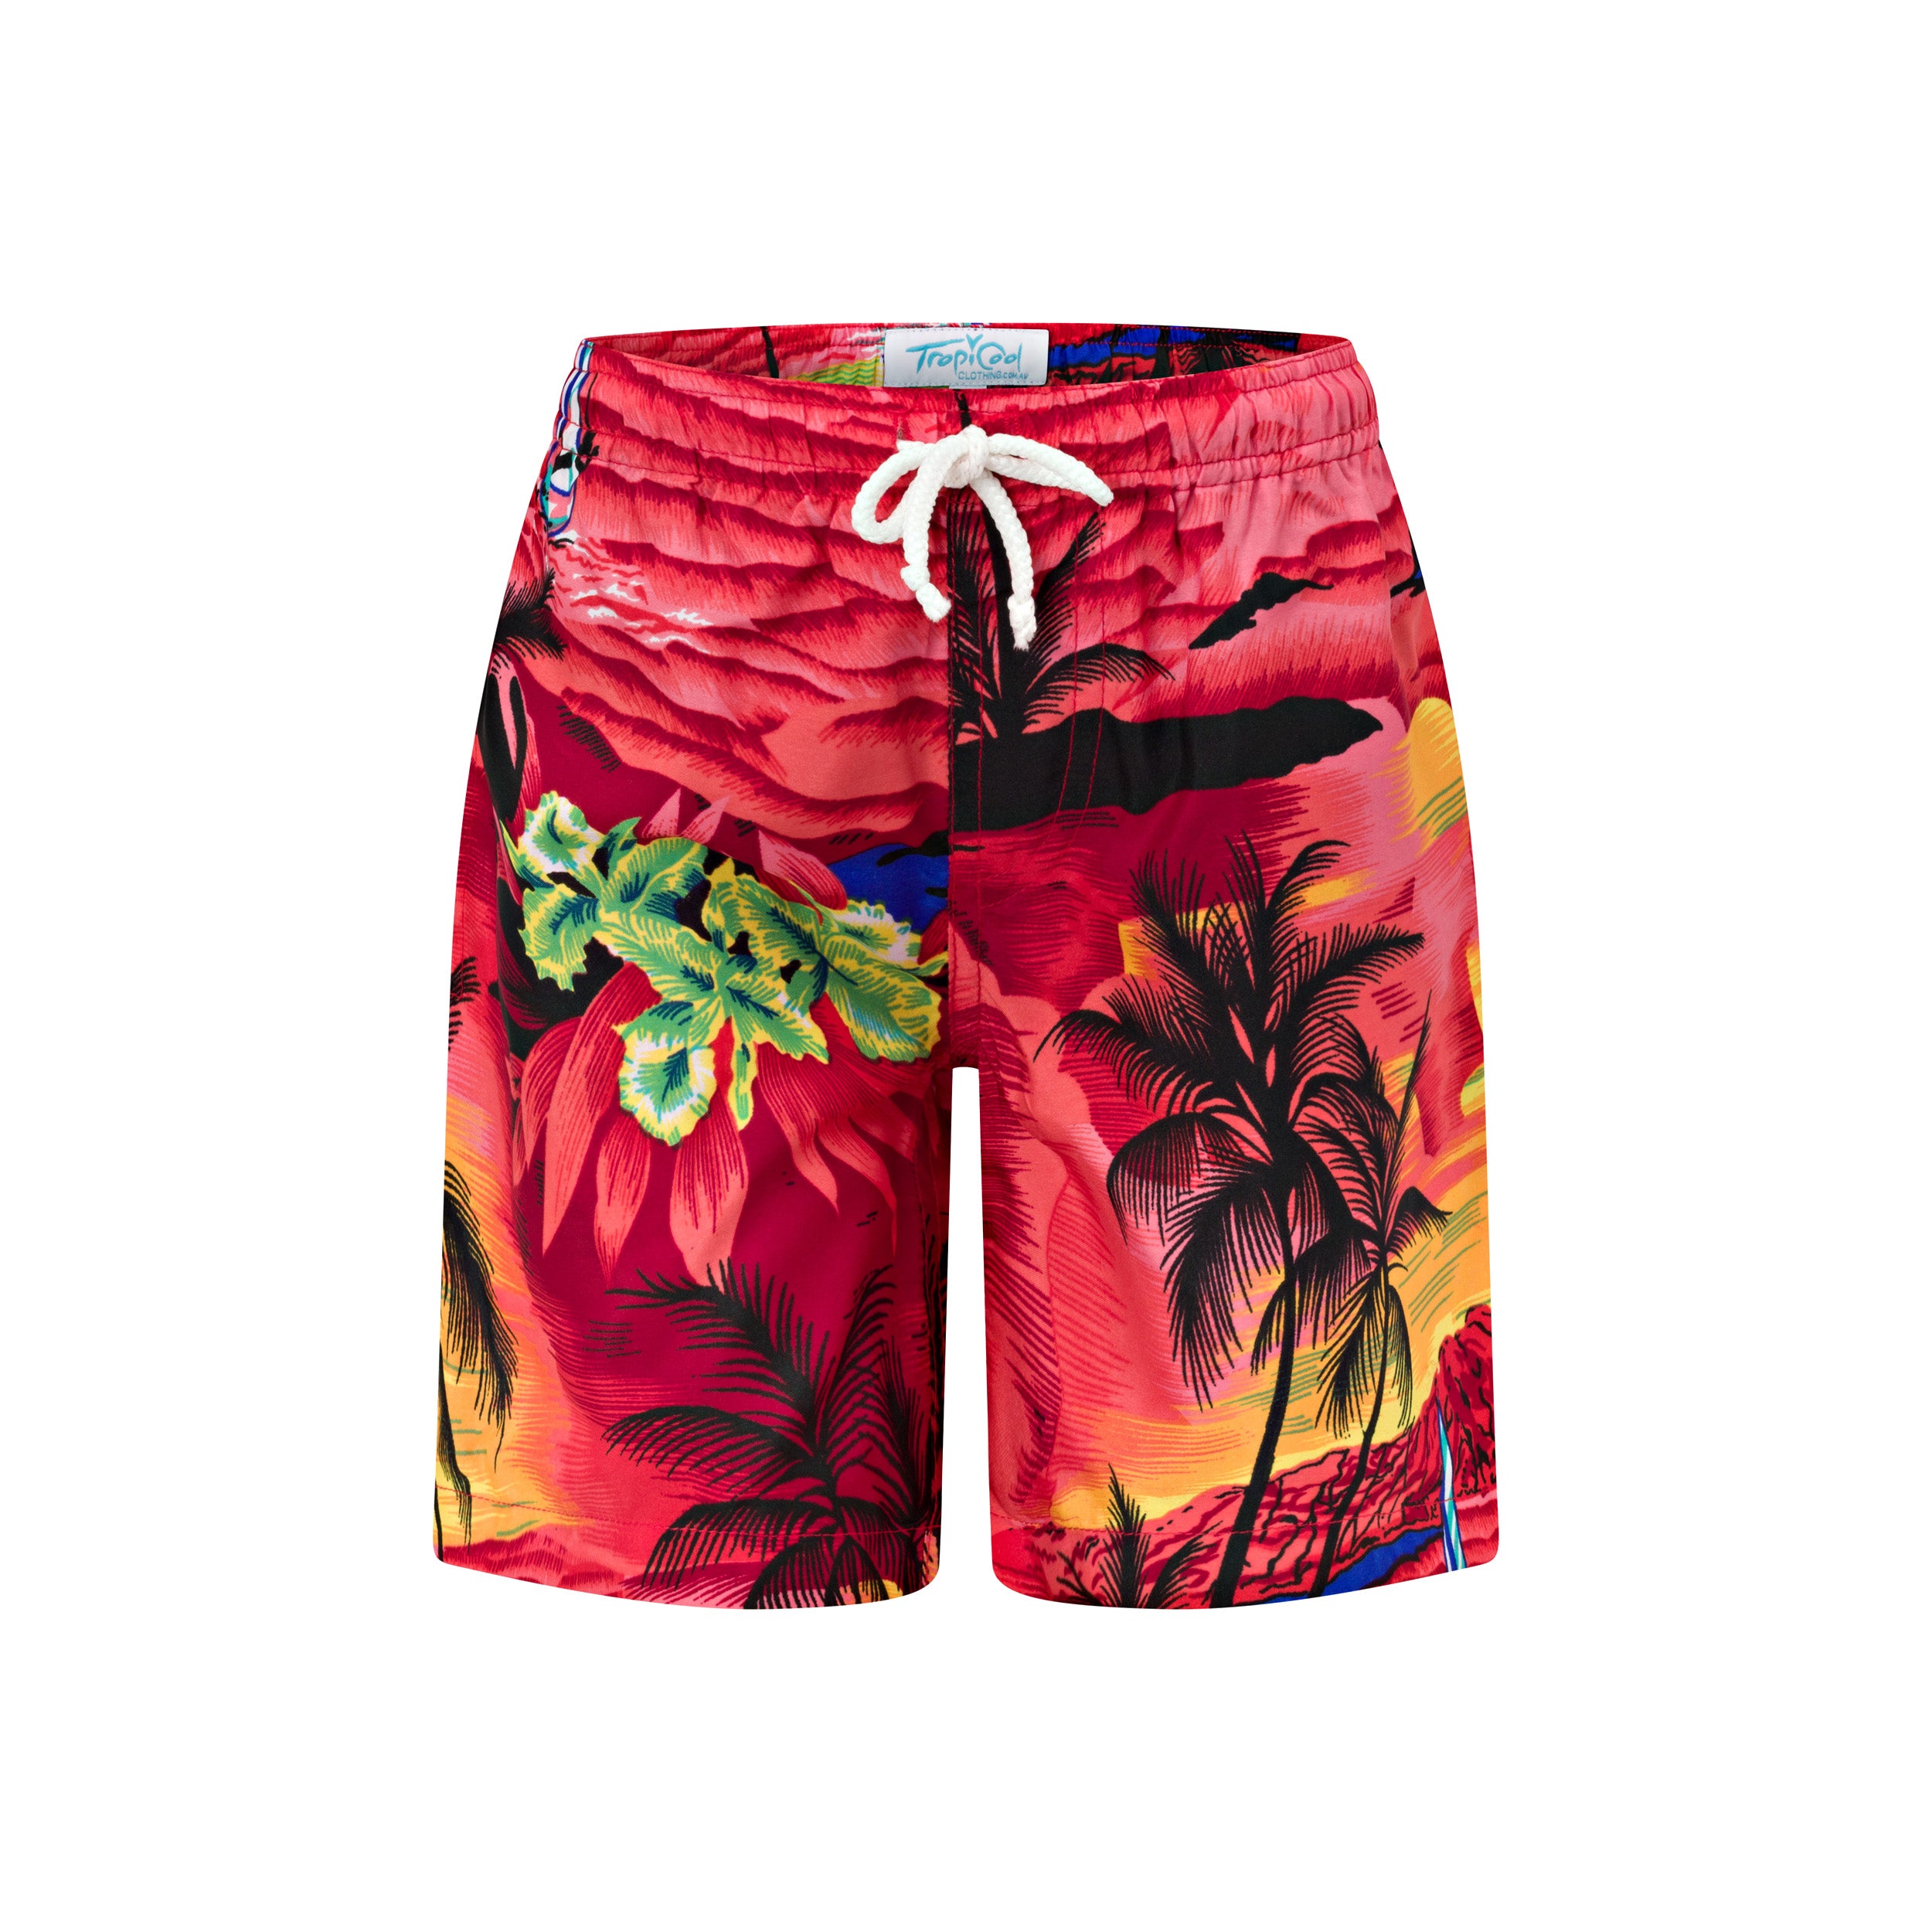 Sunset Red Adult Shorts